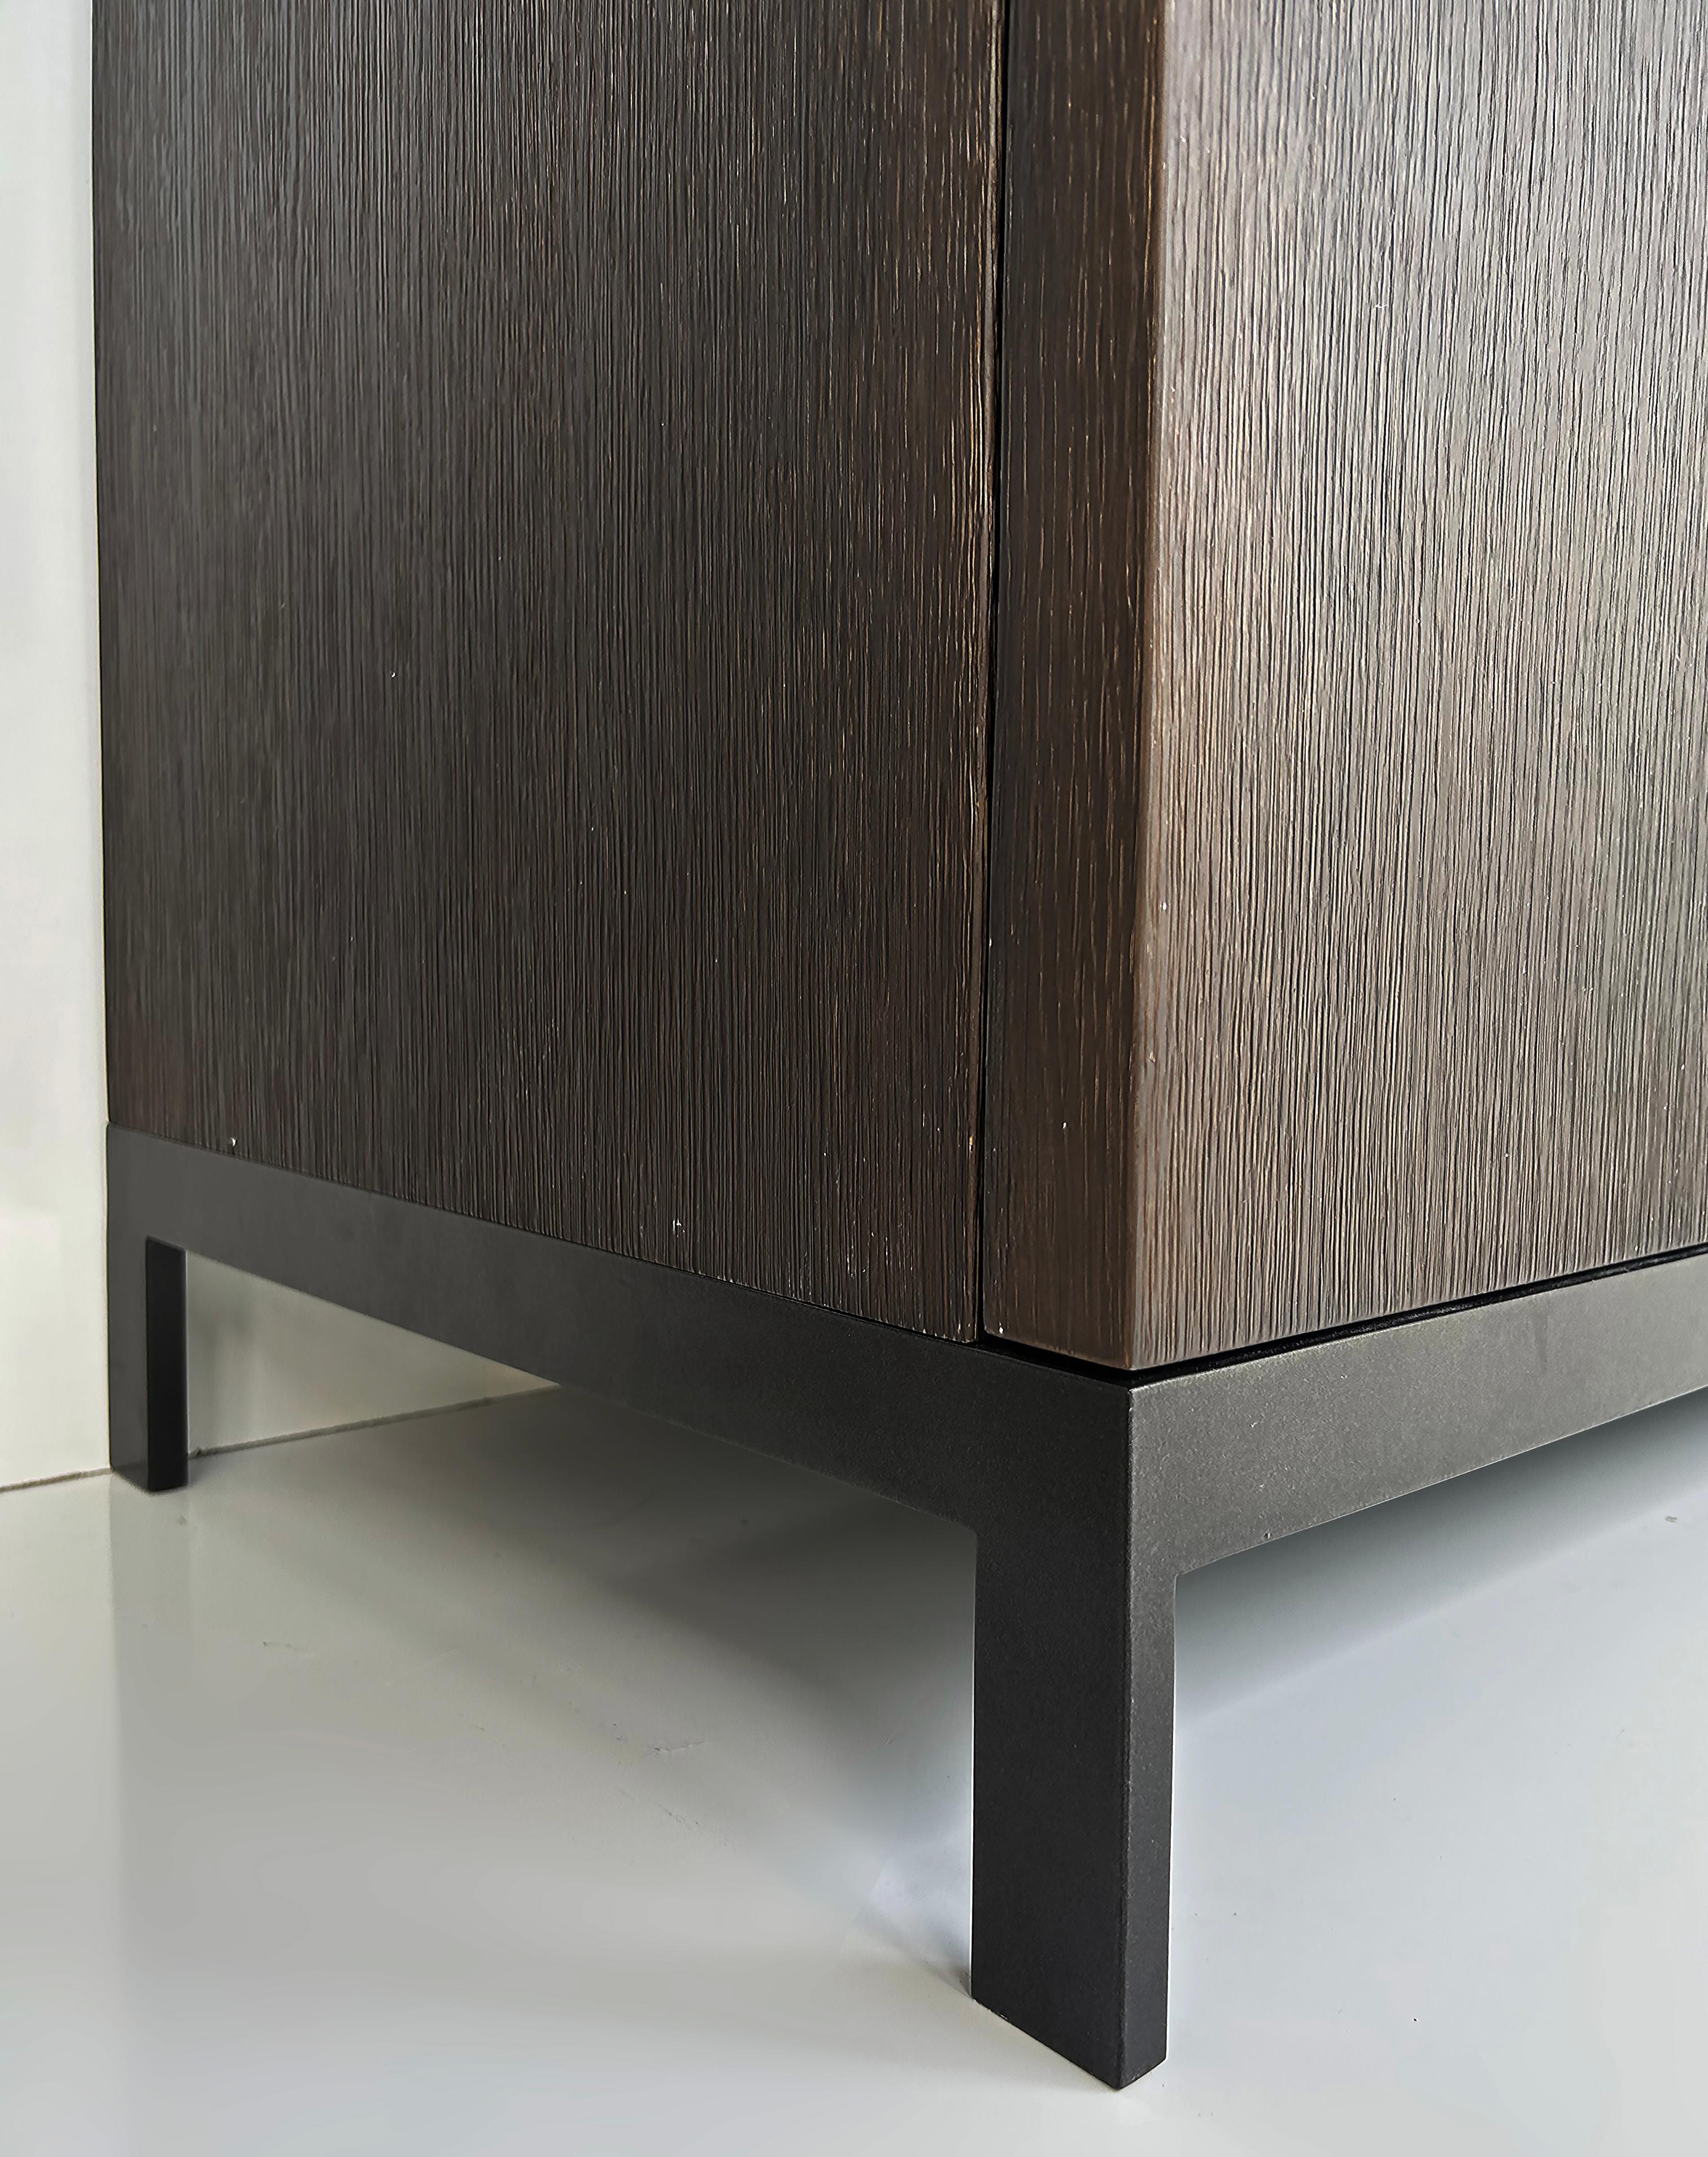 Christian Liaigre Tangris Credenza Cabinet, Sandblasted Oak and Metal 1